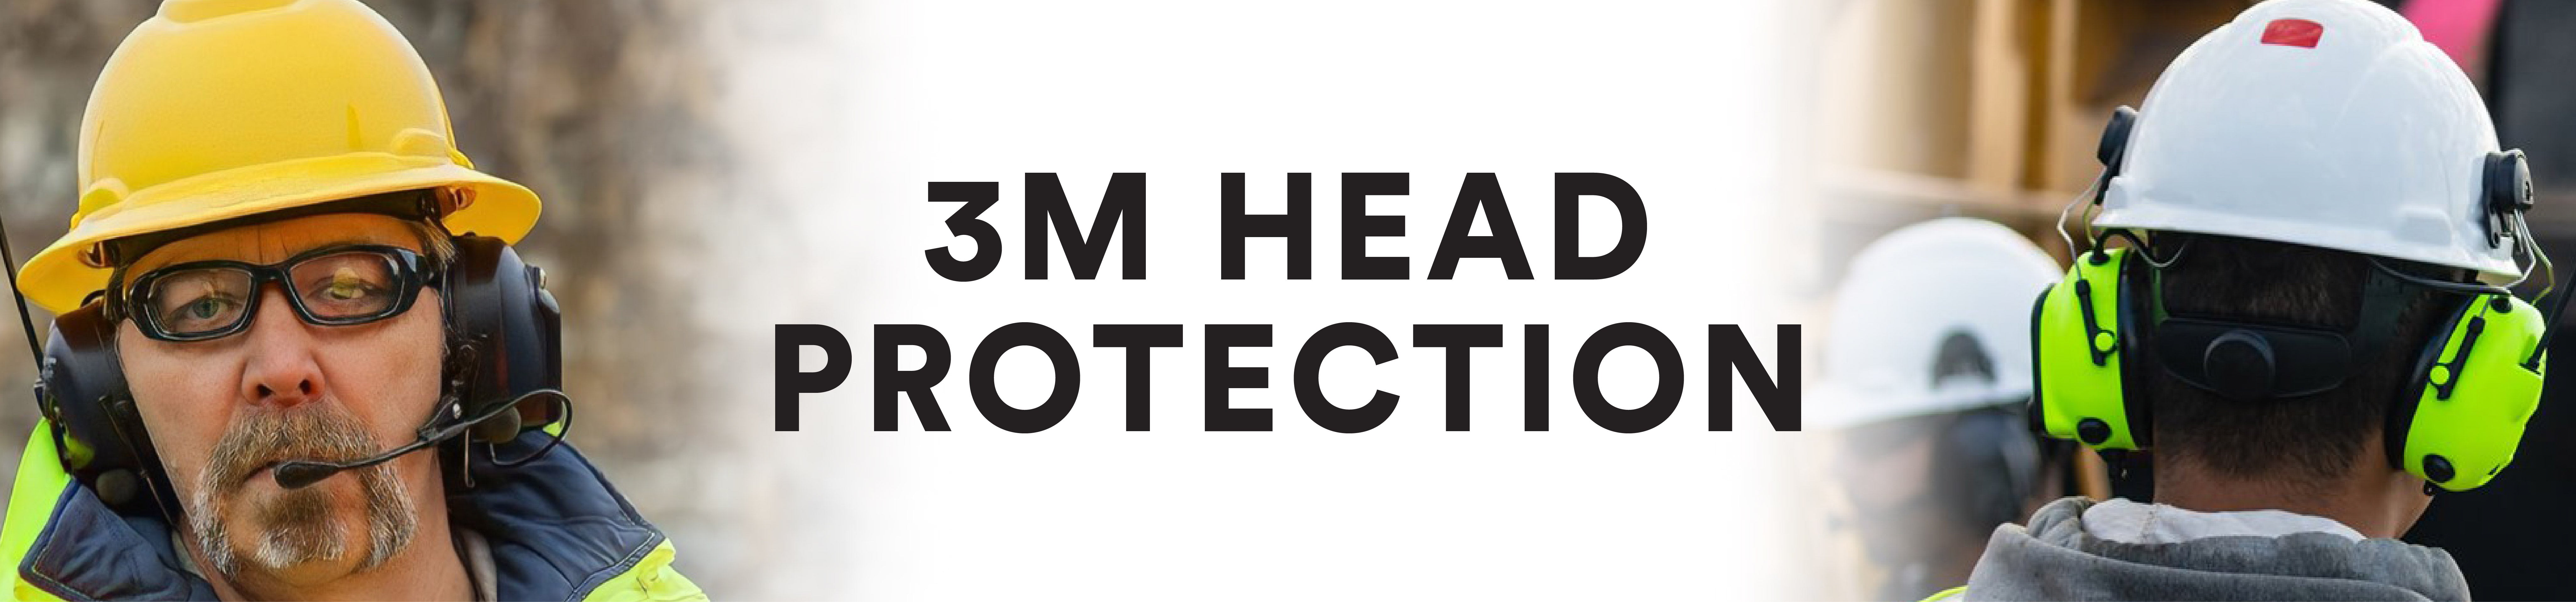 3M Head Protection